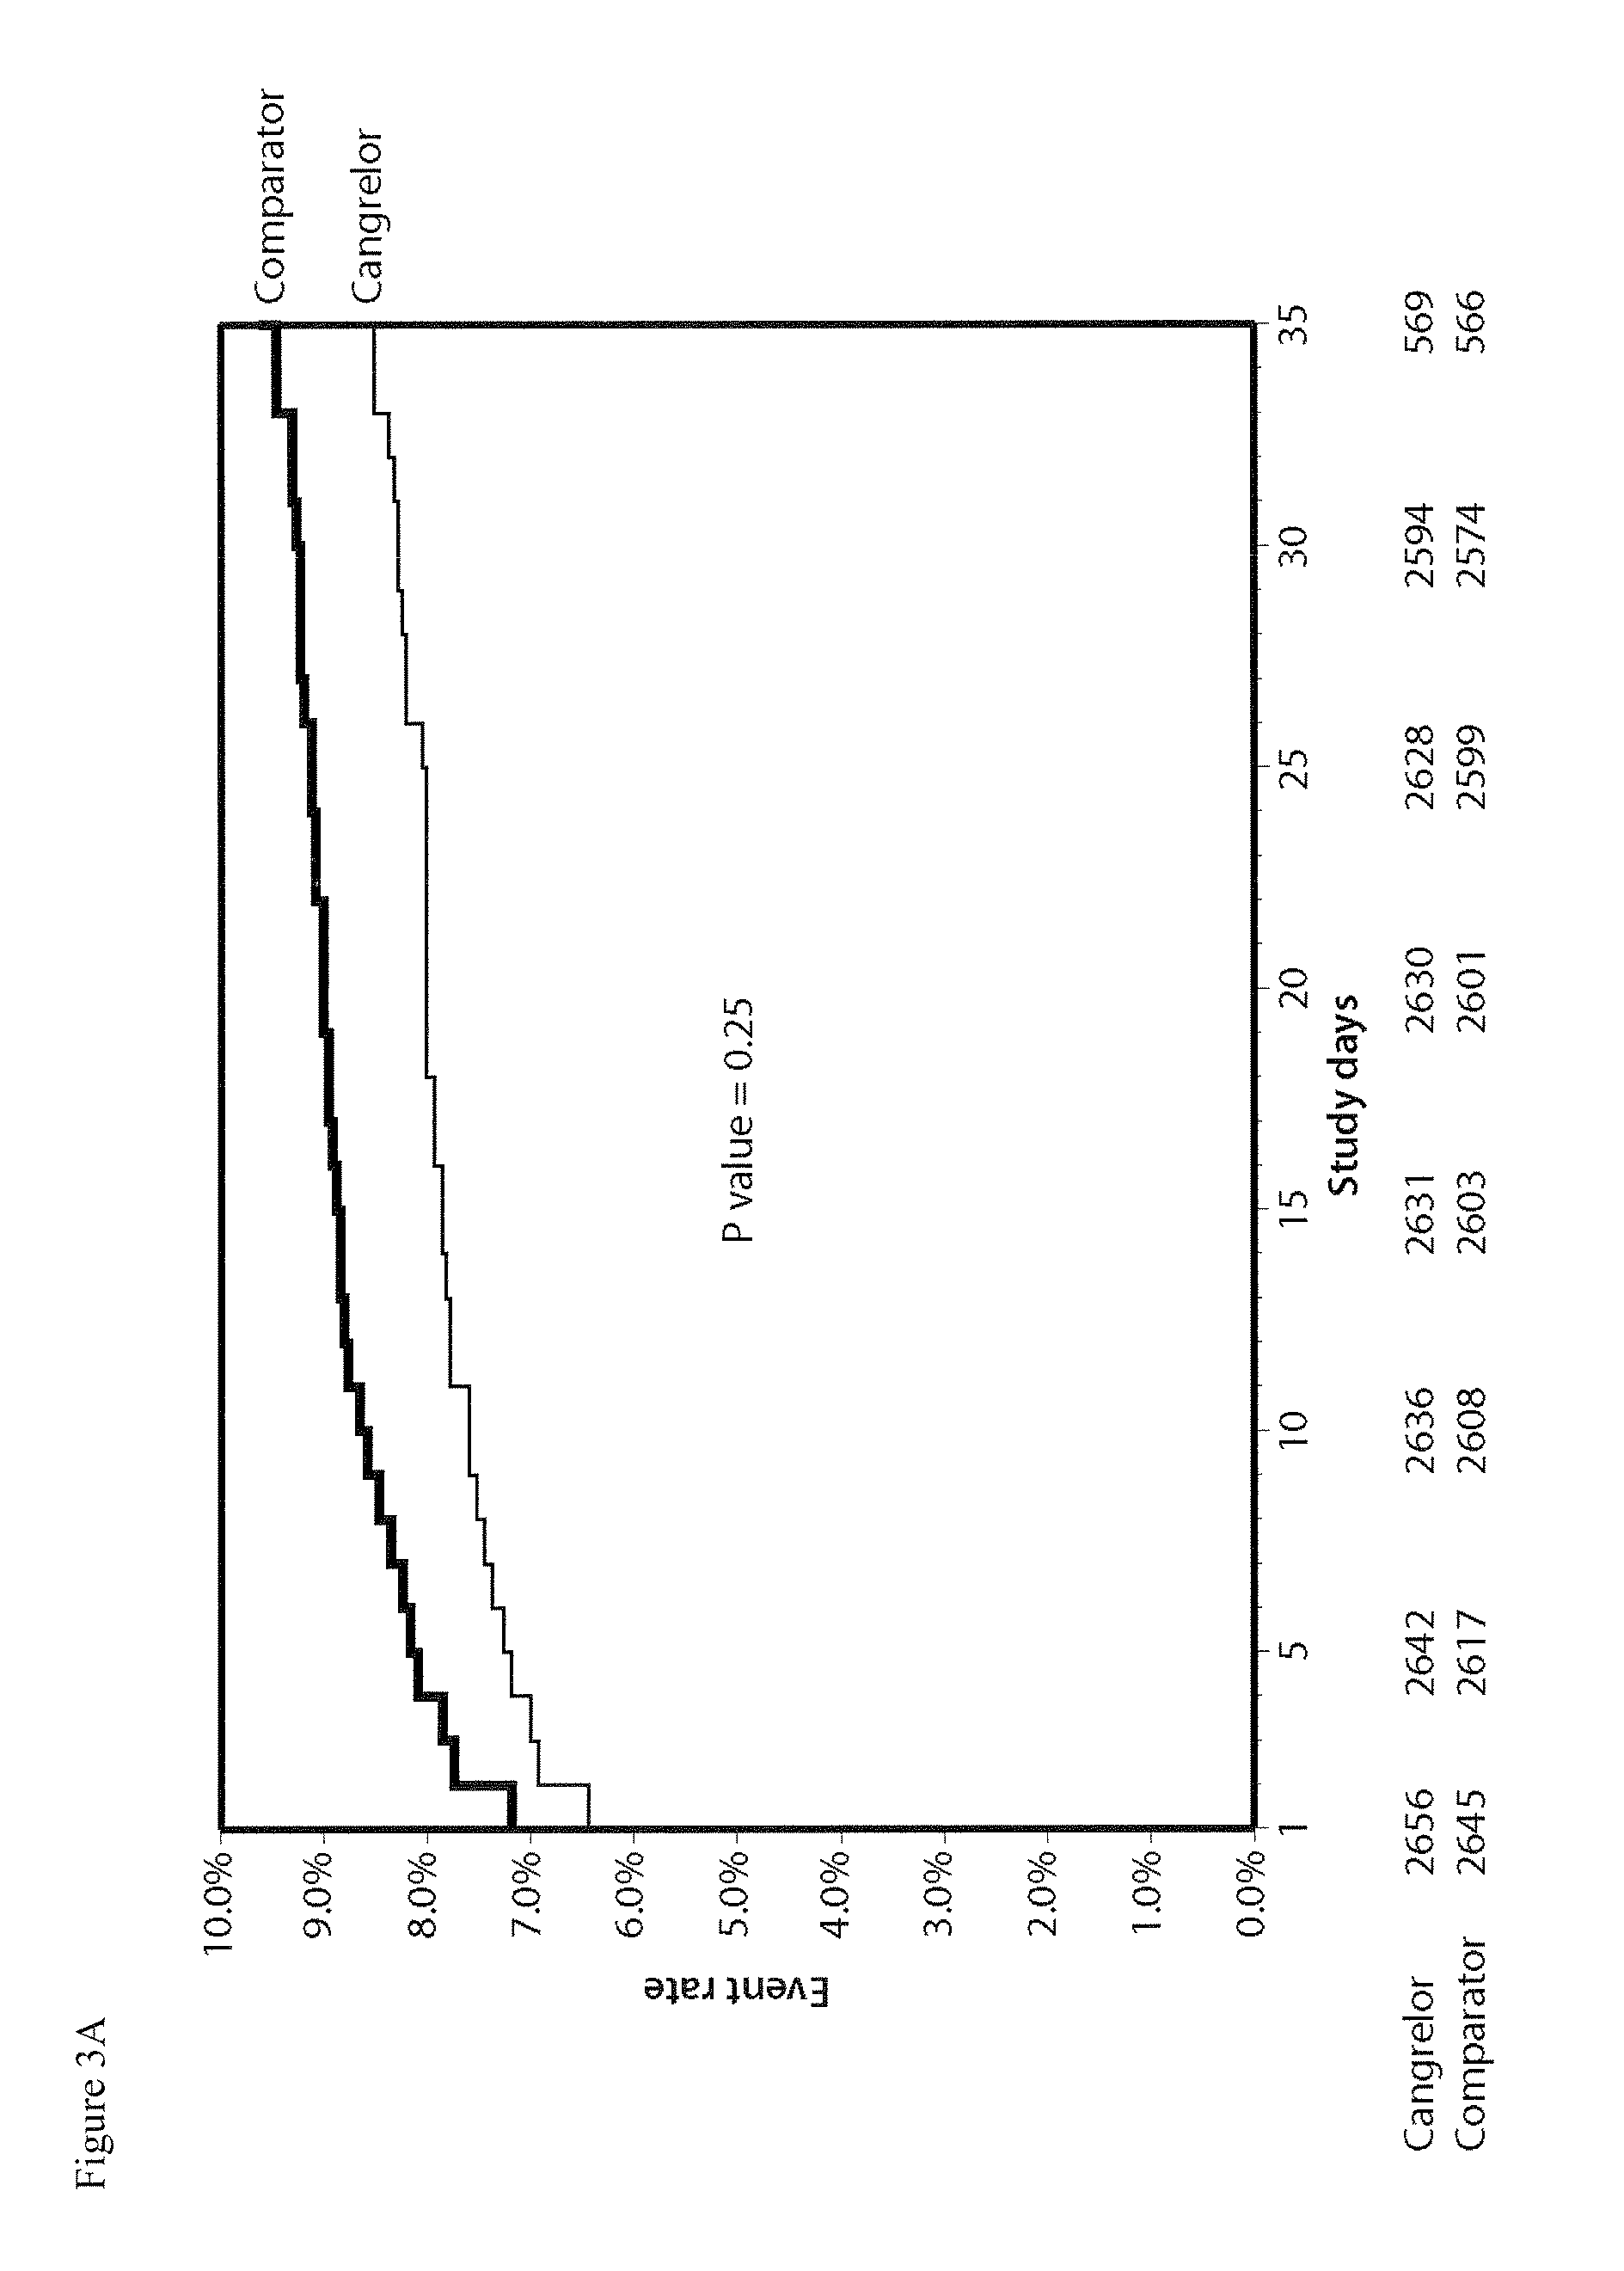 Methods of treating, reducing the incidence of, and/or preventing ischemic events